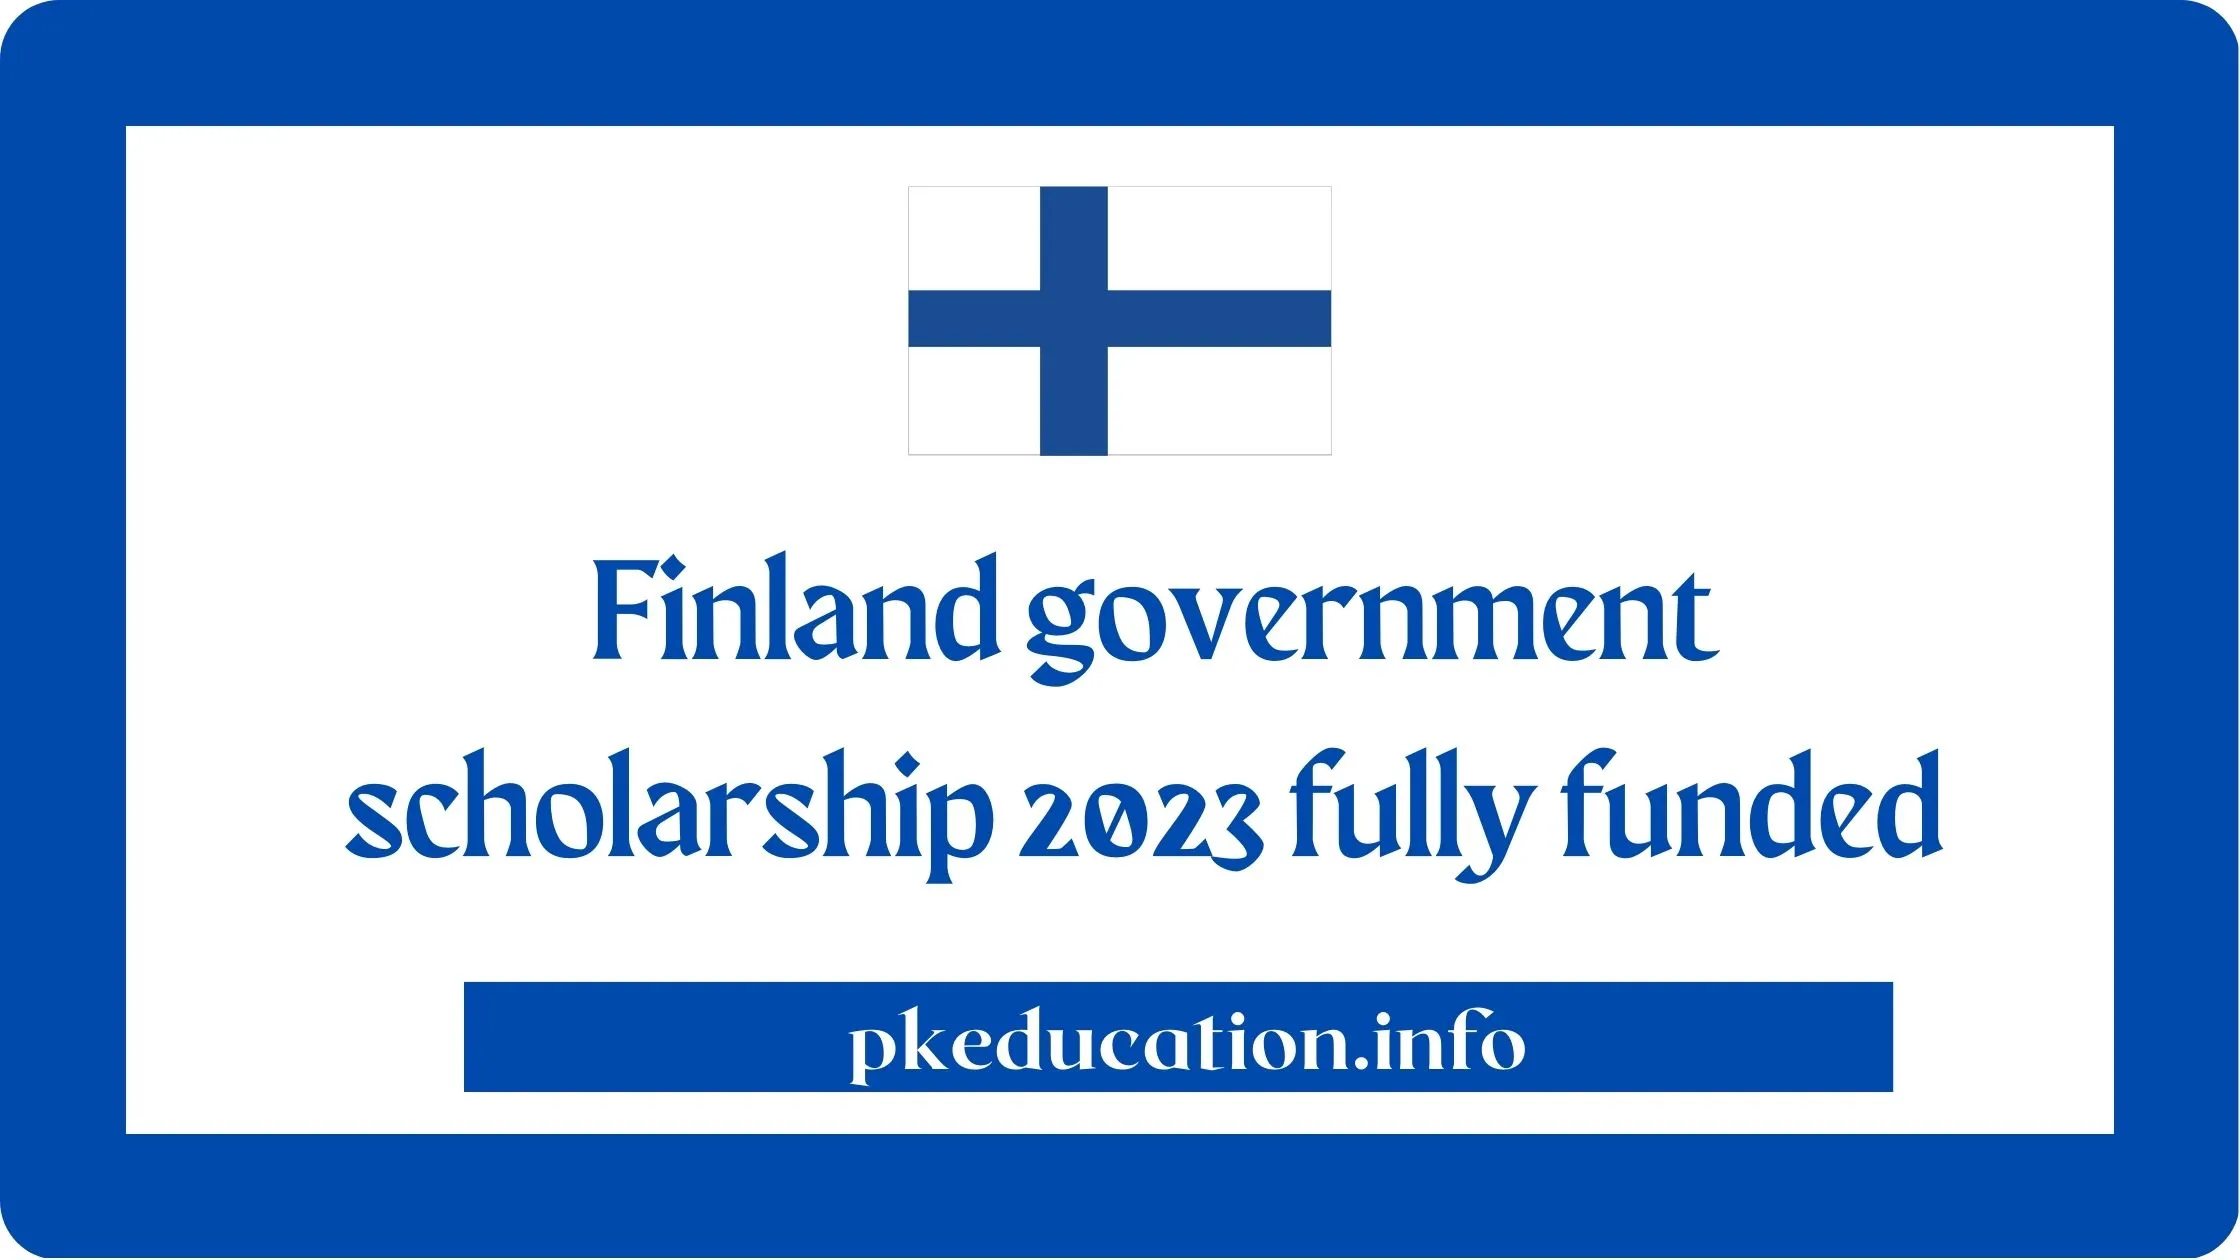 Finland government scholarship 2023 fully funded